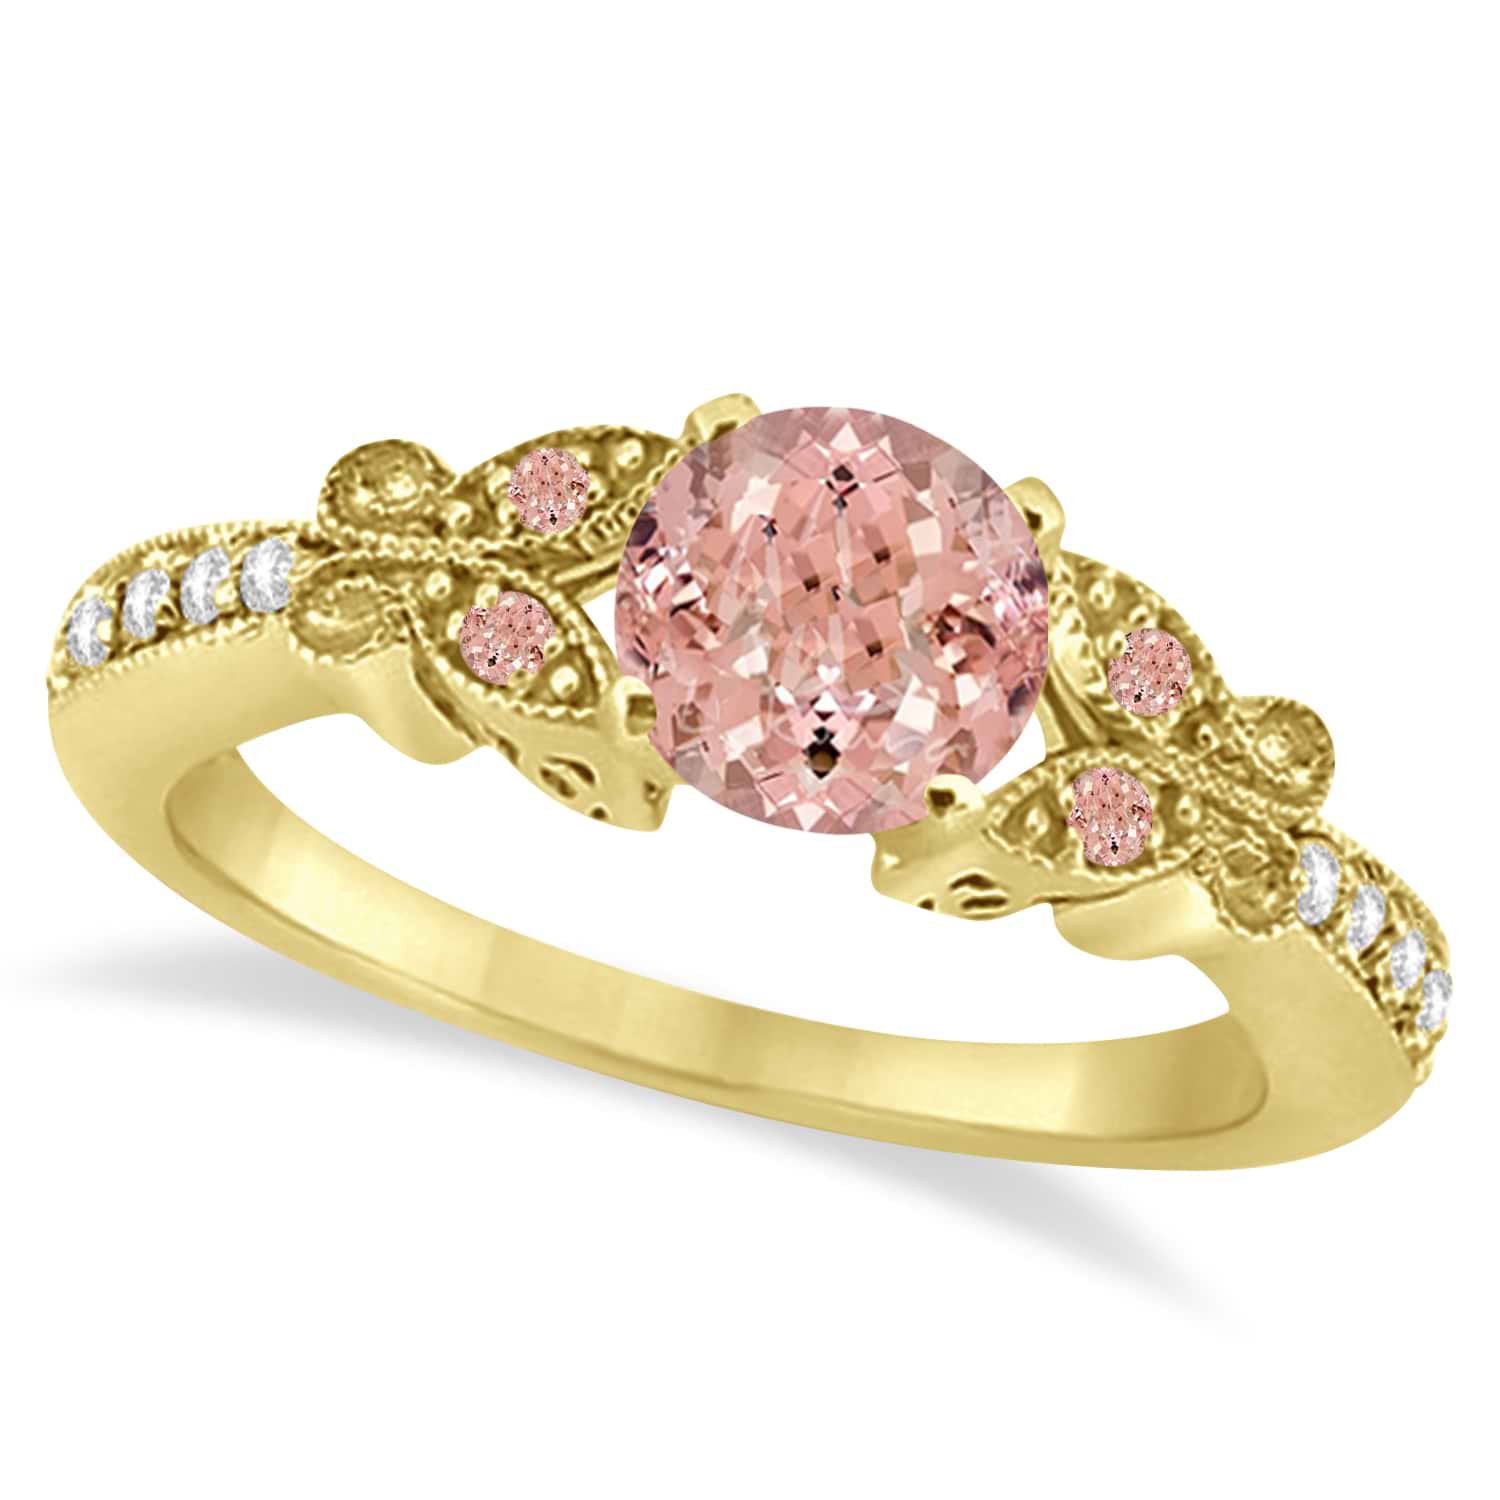 Butterfly Morganite & Diamond Engagement Ring 14K Yellow Gold 1.28ct